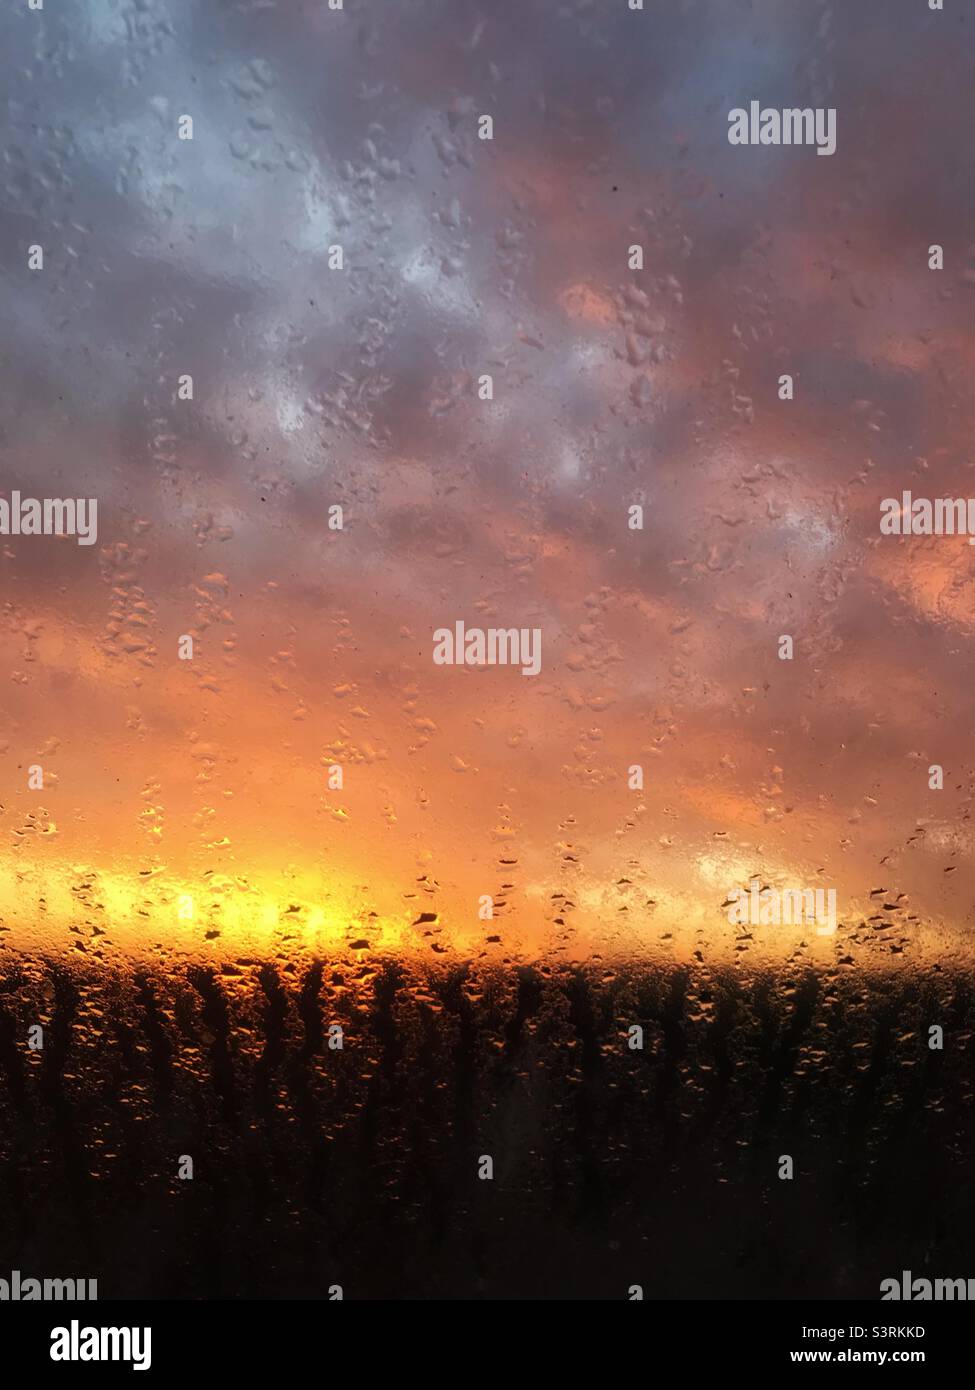 Sunrise looking through a window covered in condensation Stock Photo